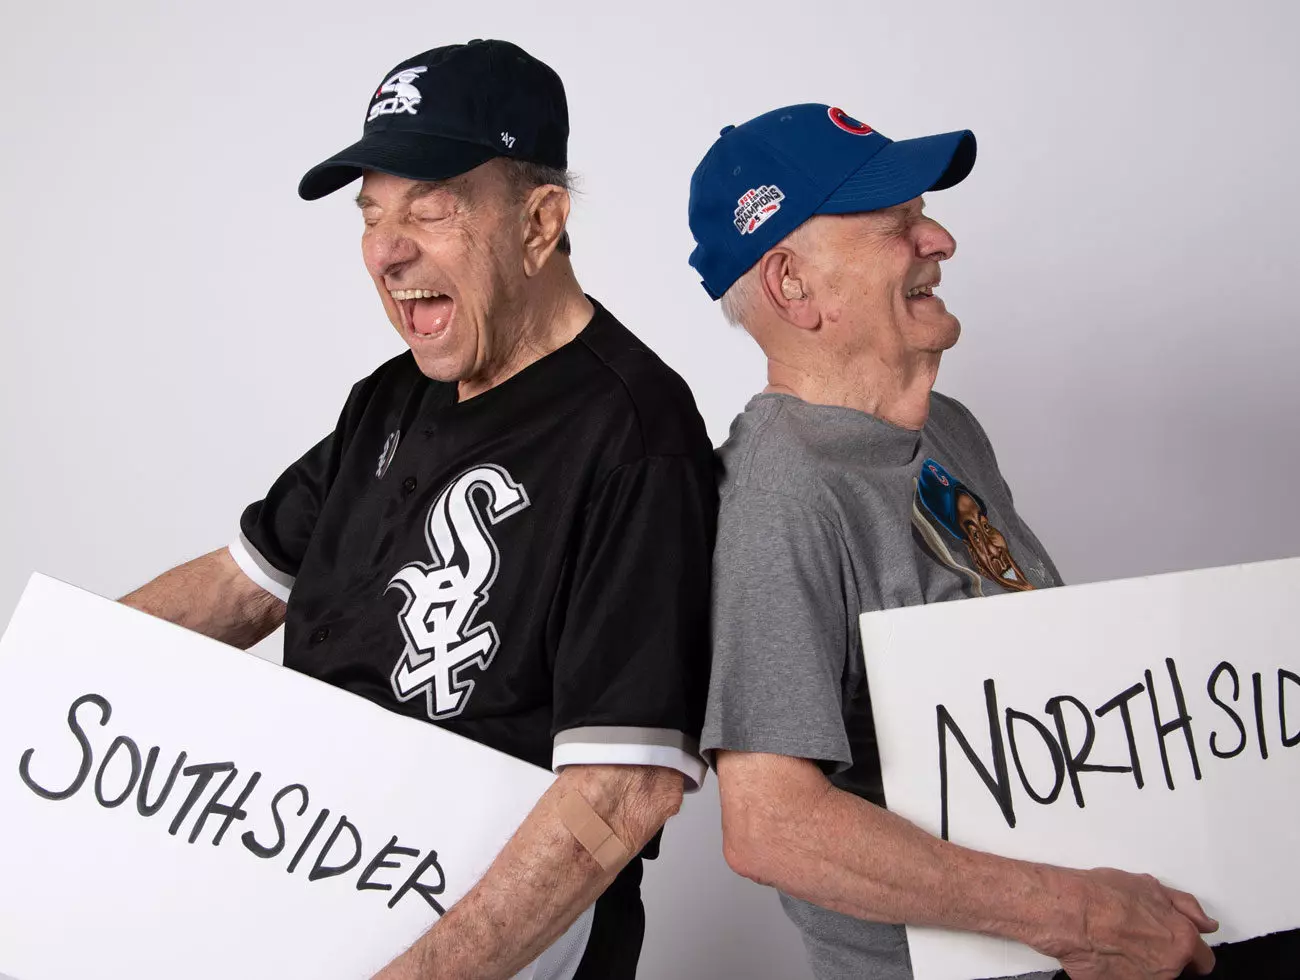 White Sox Hate The Cubs Shirts